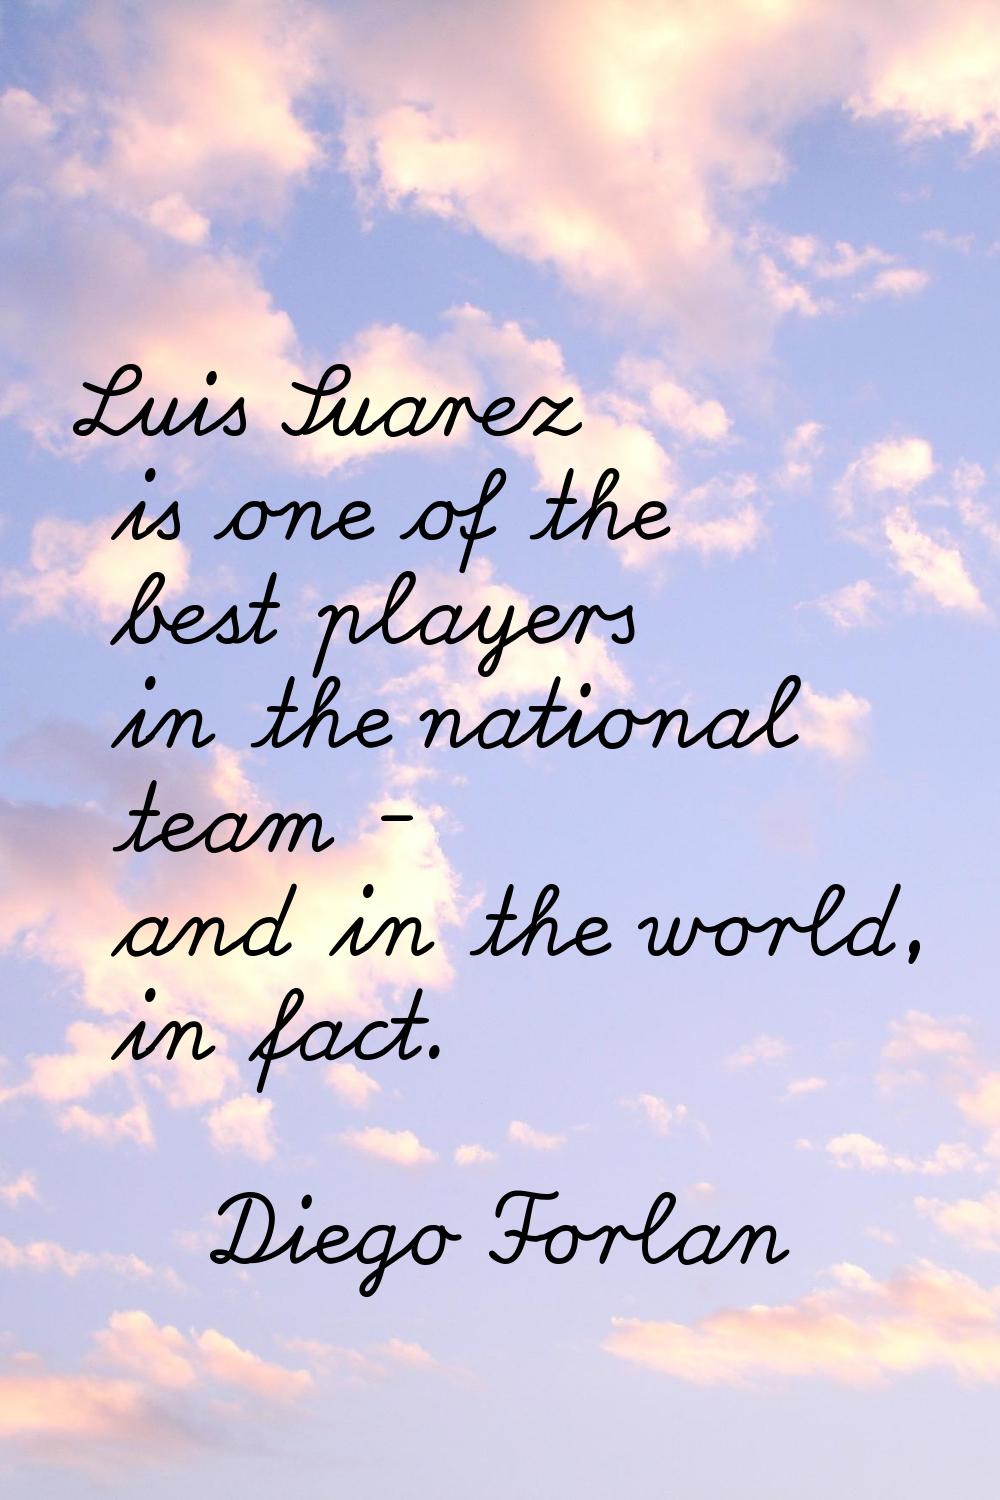 Luis Suarez is one of the best players in the national team - and in the world, in fact.